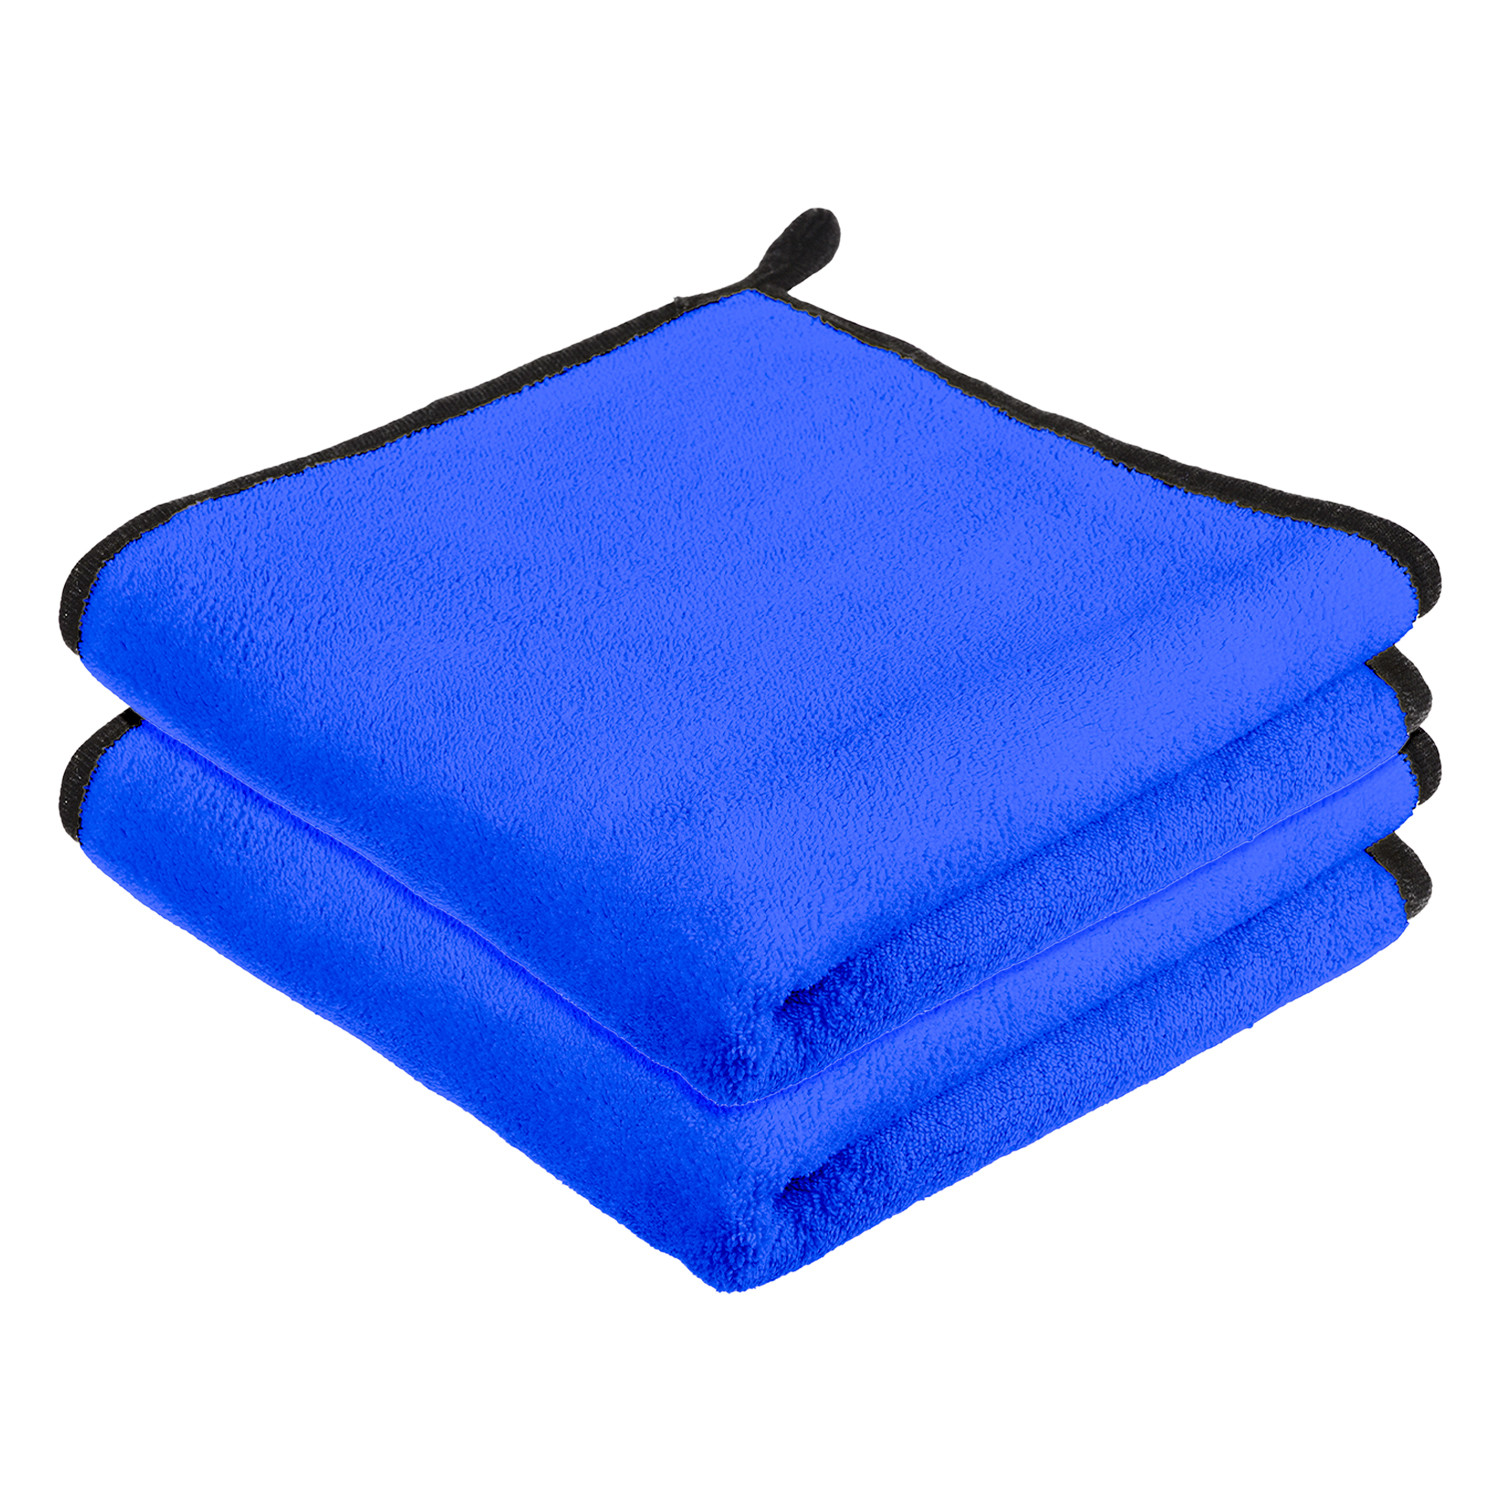 Kuber Industries Cleaning Towel|Microfiber Reusable Cloths|Highly Absorbent Washable Towel for Kitchen With Hanging Loop|Car|Window|40x40 Cm|Blue